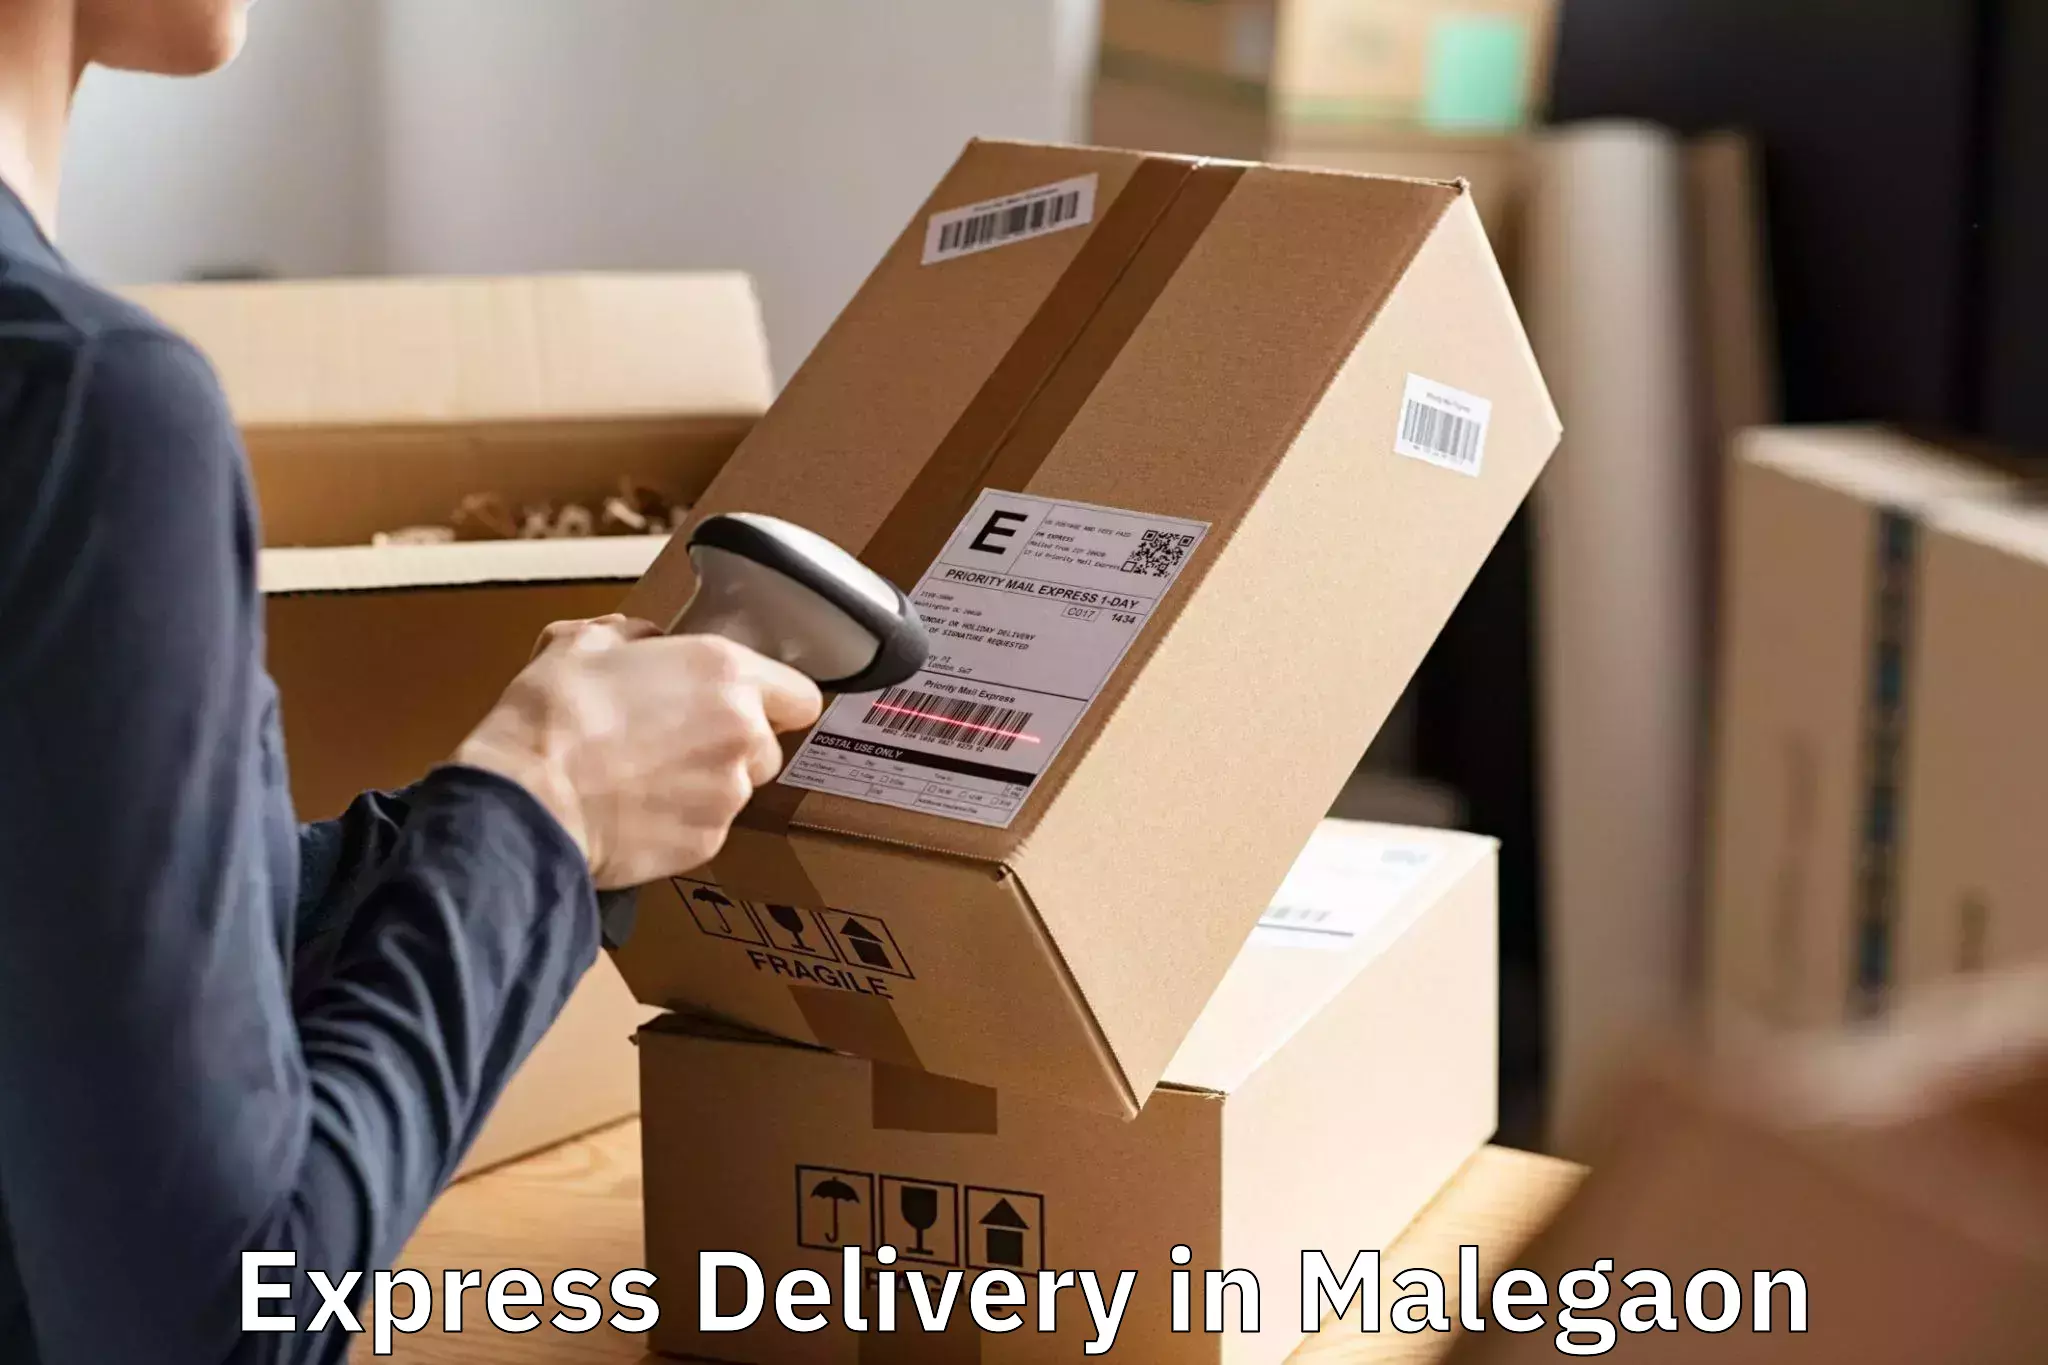 Easy Express Delivery Booking in Malegaon, Maharashtra (MH)